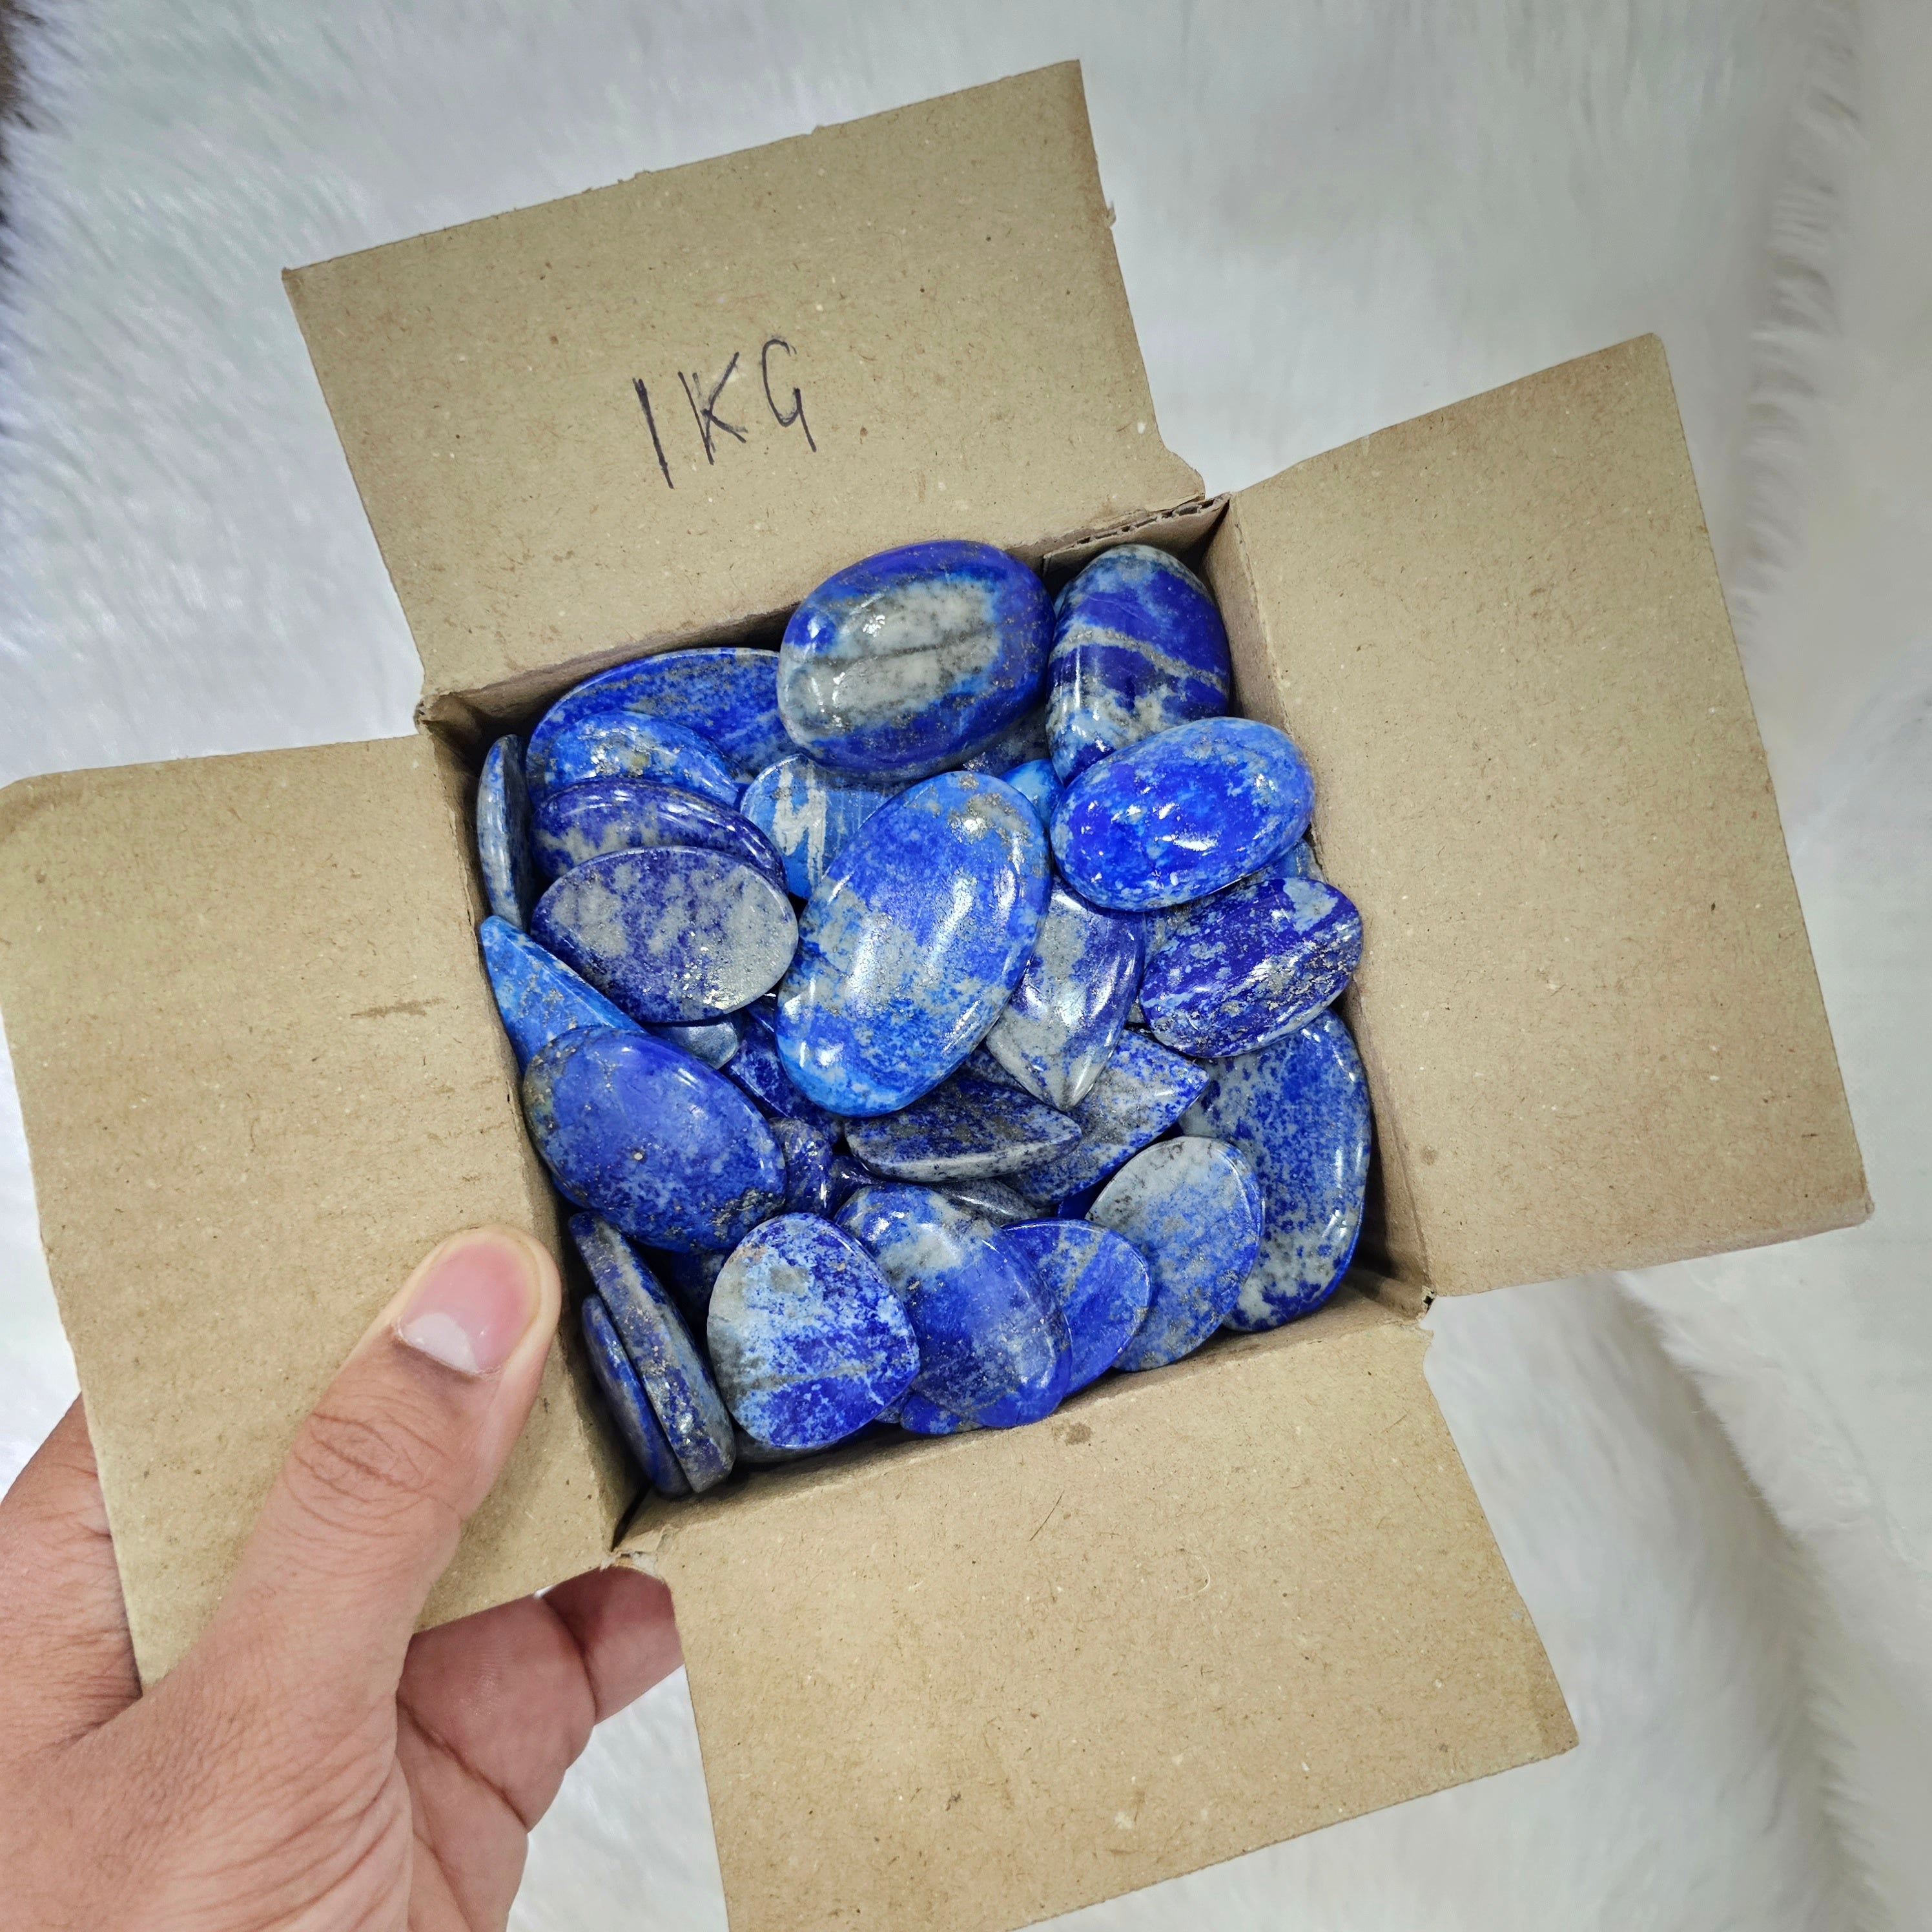 1KG of Natural Lapis Lazuli Cabochons | 1 Inches to 4 Inches - The LabradoriteKing